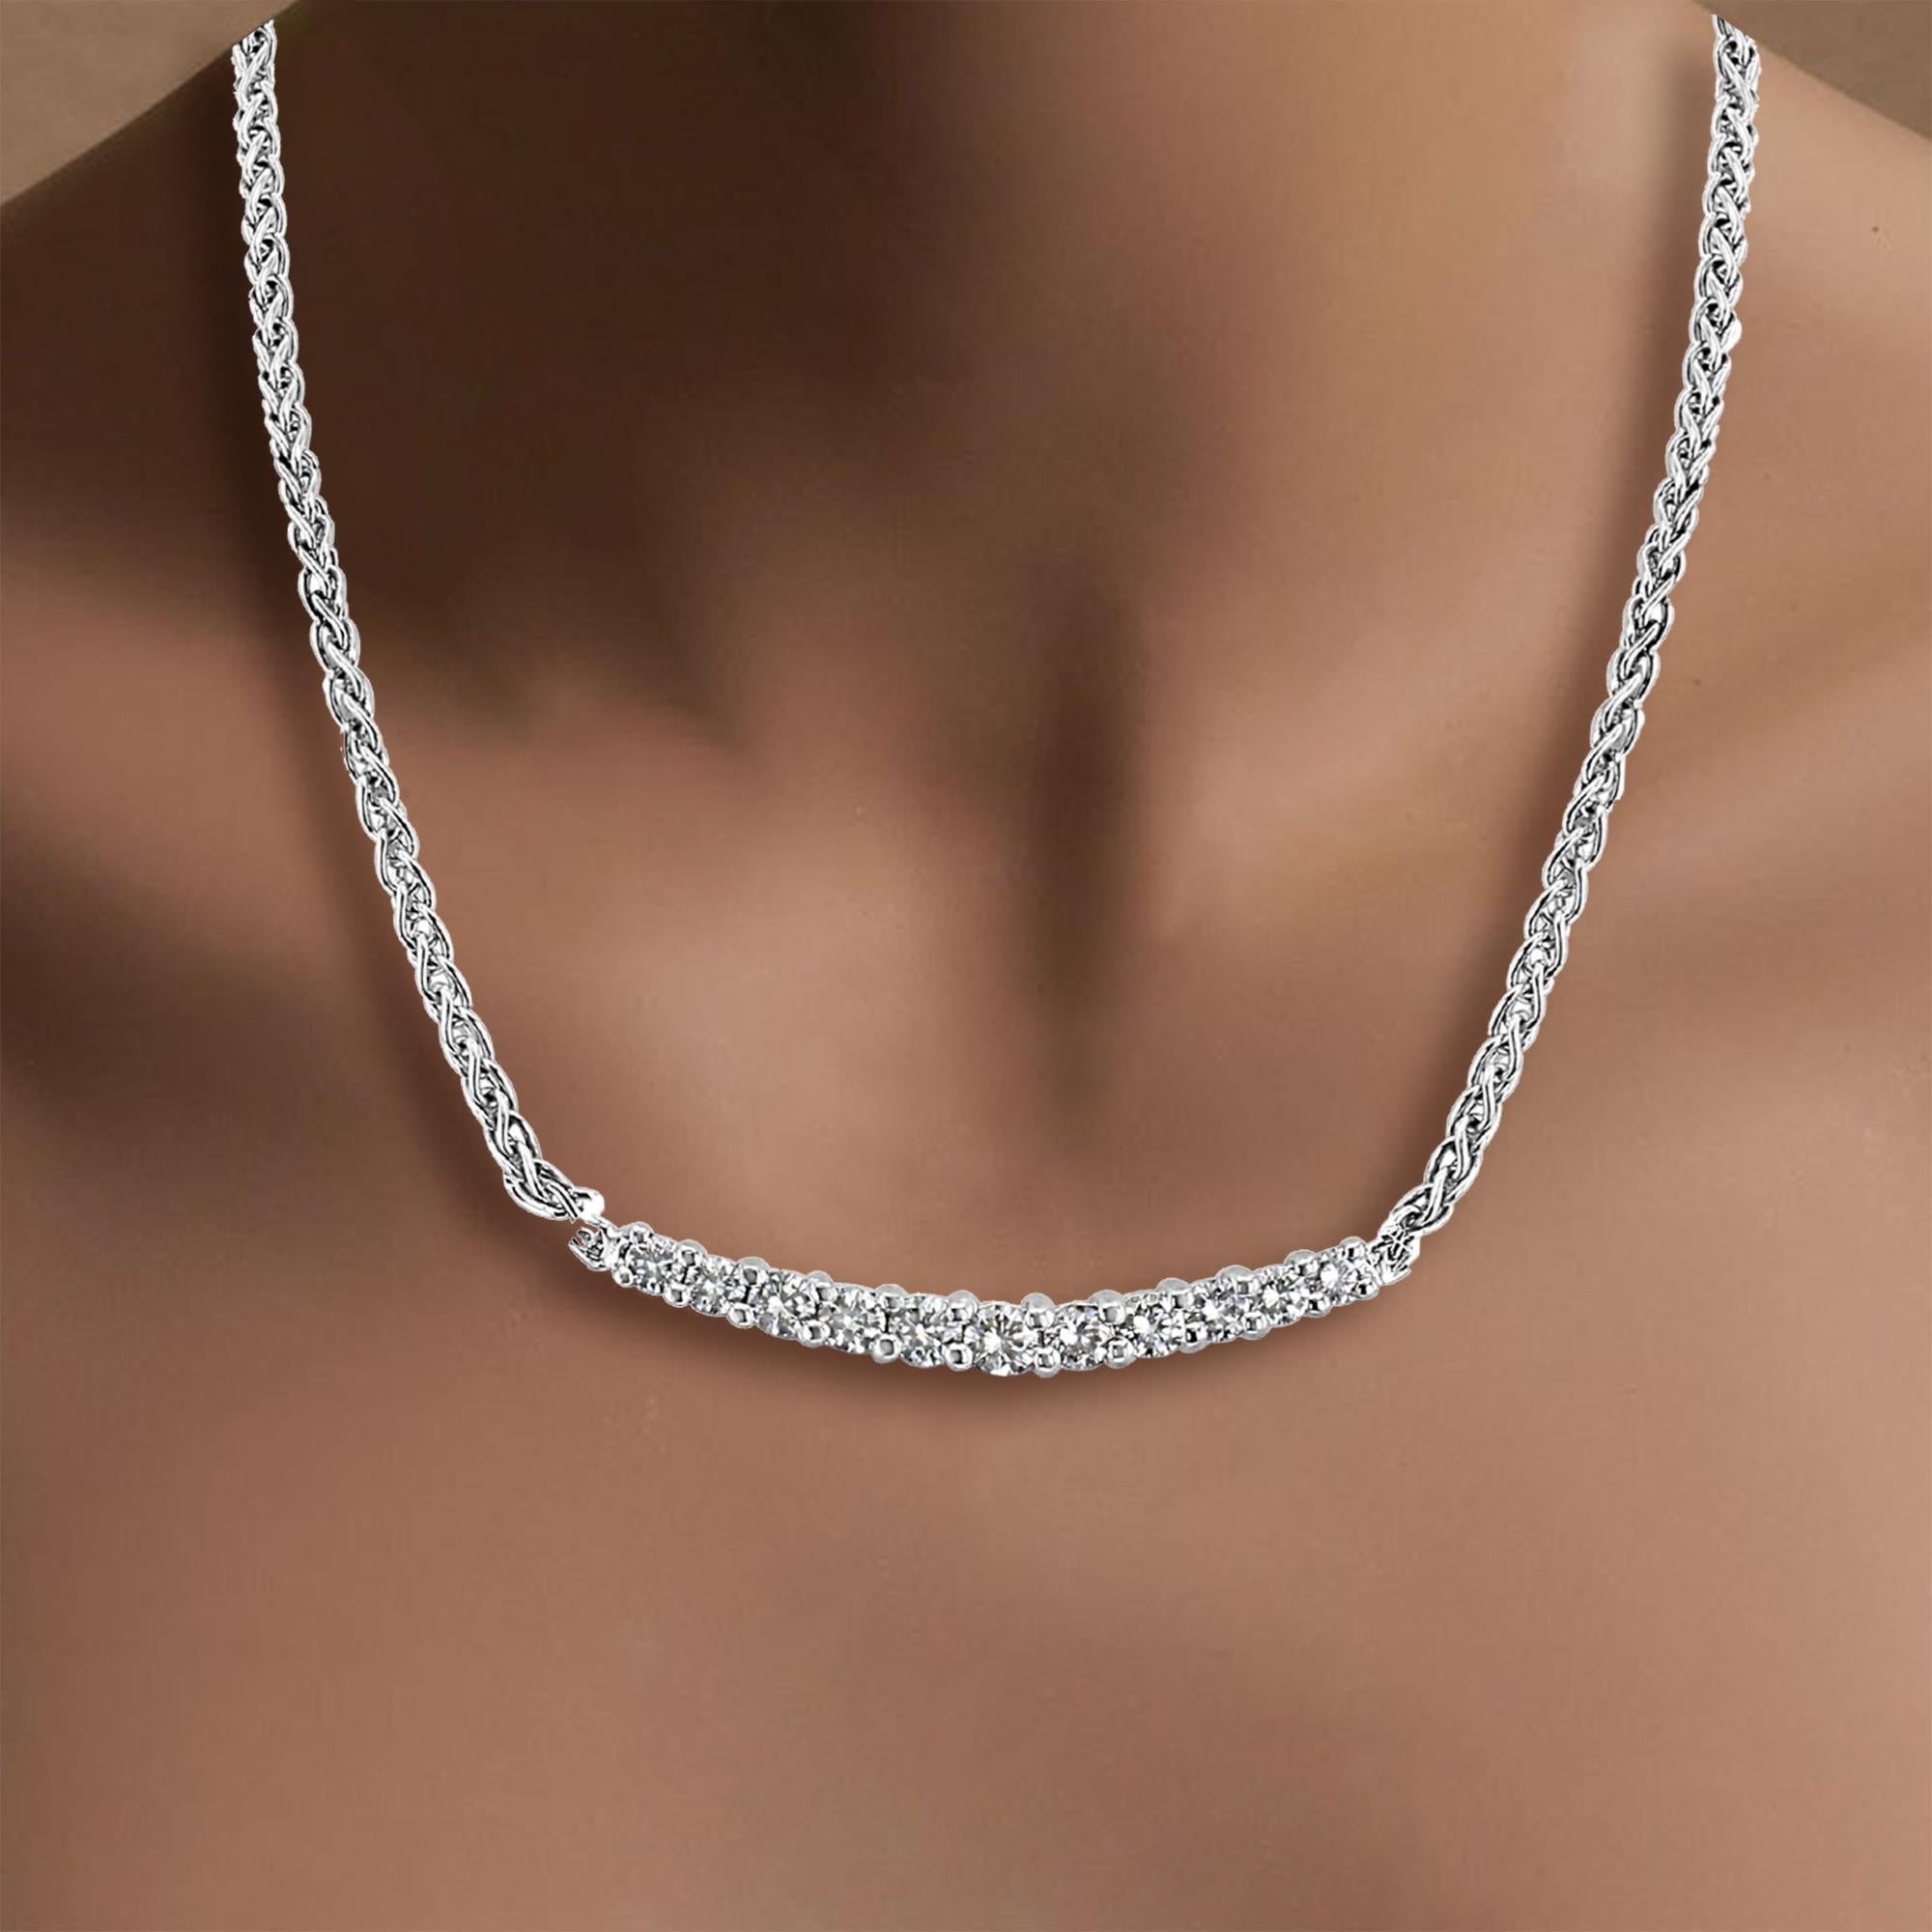 ♥ Product Summary ♥

Main Stone: Diamond
Approx. Carat Weight: .50cttw
Diamond Color: F/G
Diamond Clarity: VS2
Stone Cut: Round
Material: 14k White Gold
Dimensions: 3mm x 32mm
Weight: 6 grams
Chain: 16